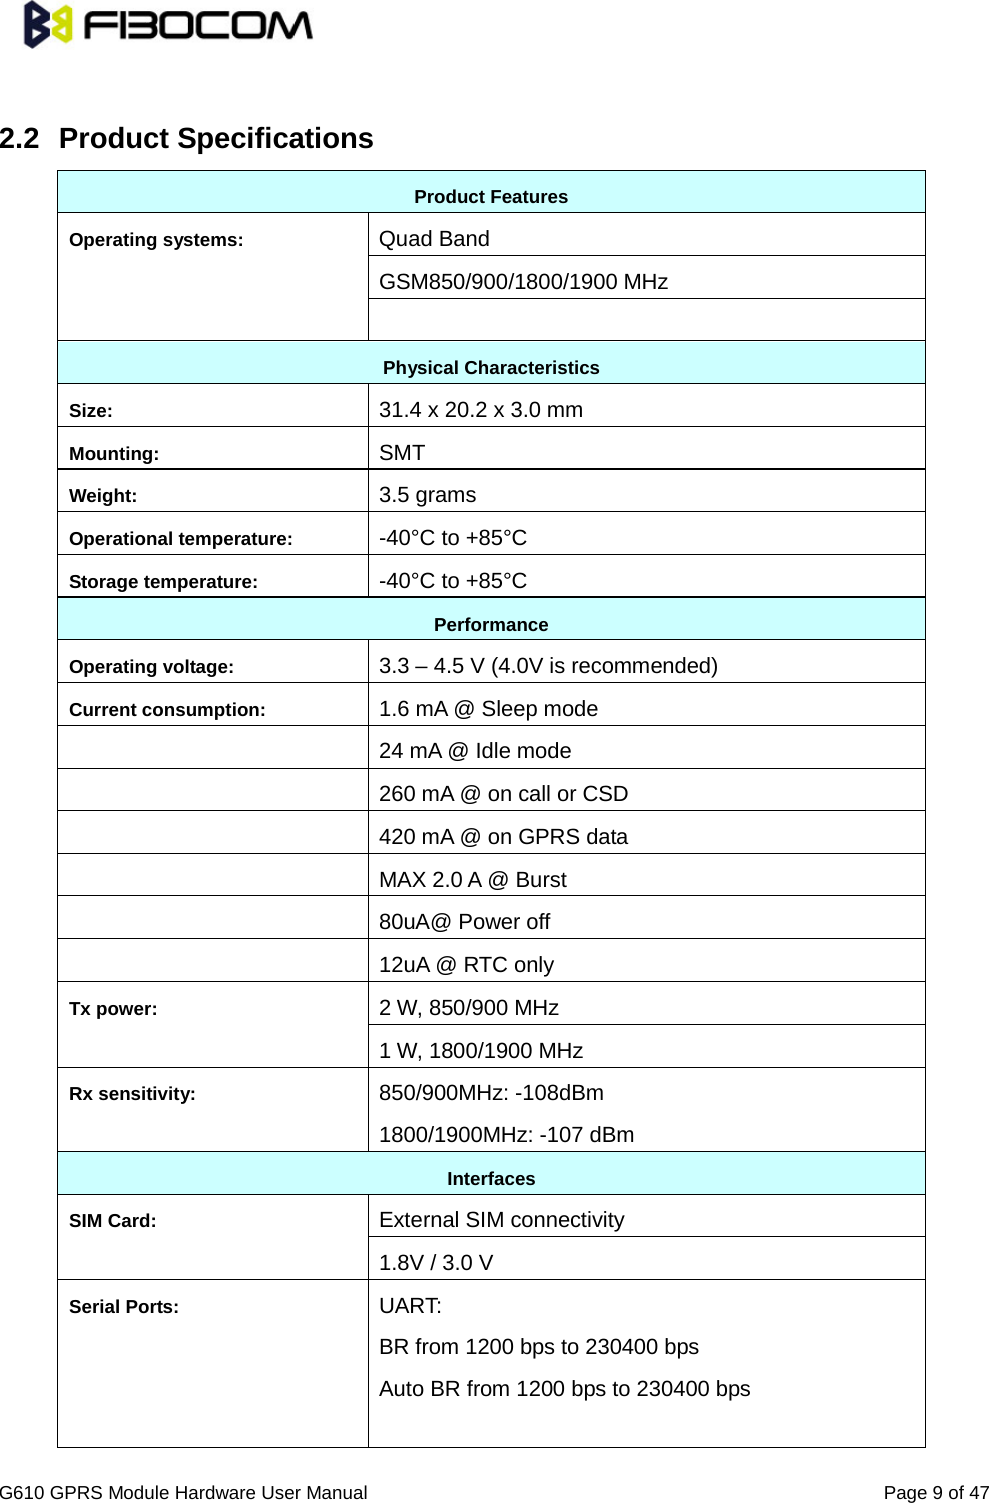                                                                               G610 GPRS Module Hardware User Manual                                                          Page 9 of 47   2.2 Product Specifications Product Features Operating systems: Quad Band GSM850/900/1800/1900 MHz  Physical Characteristics Size:   31.4 x 20.2 x 3.0 mm Mounting:   SMT   Weight:   3.5 grams   Operational temperature: -40°C to +85°C   Storage temperature:   -40°C to +85°C   Performance Operating voltage:   3.3 – 4.5 V (4.0V is recommended) Current consumption:   1.6 mA @ Sleep mode  24 mA @ Idle mode    260 mA @ on call or CSD    420 mA @ on GPRS data  MAX 2.0 A @ Burst  80uA@ Power off  12uA @ RTC only Tx power:   2 W, 850/900 MHz   1 W, 1800/1900 MHz   Rx sensitivity:   850/900MHz: -108dBm 1800/1900MHz: -107 dBm Interfaces SIM Card:   External SIM connectivity   1.8V / 3.0 V   Serial Ports:   UART:   BR from 1200 bps to 230400 bps Auto BR from 1200 bps to 230400 bps  